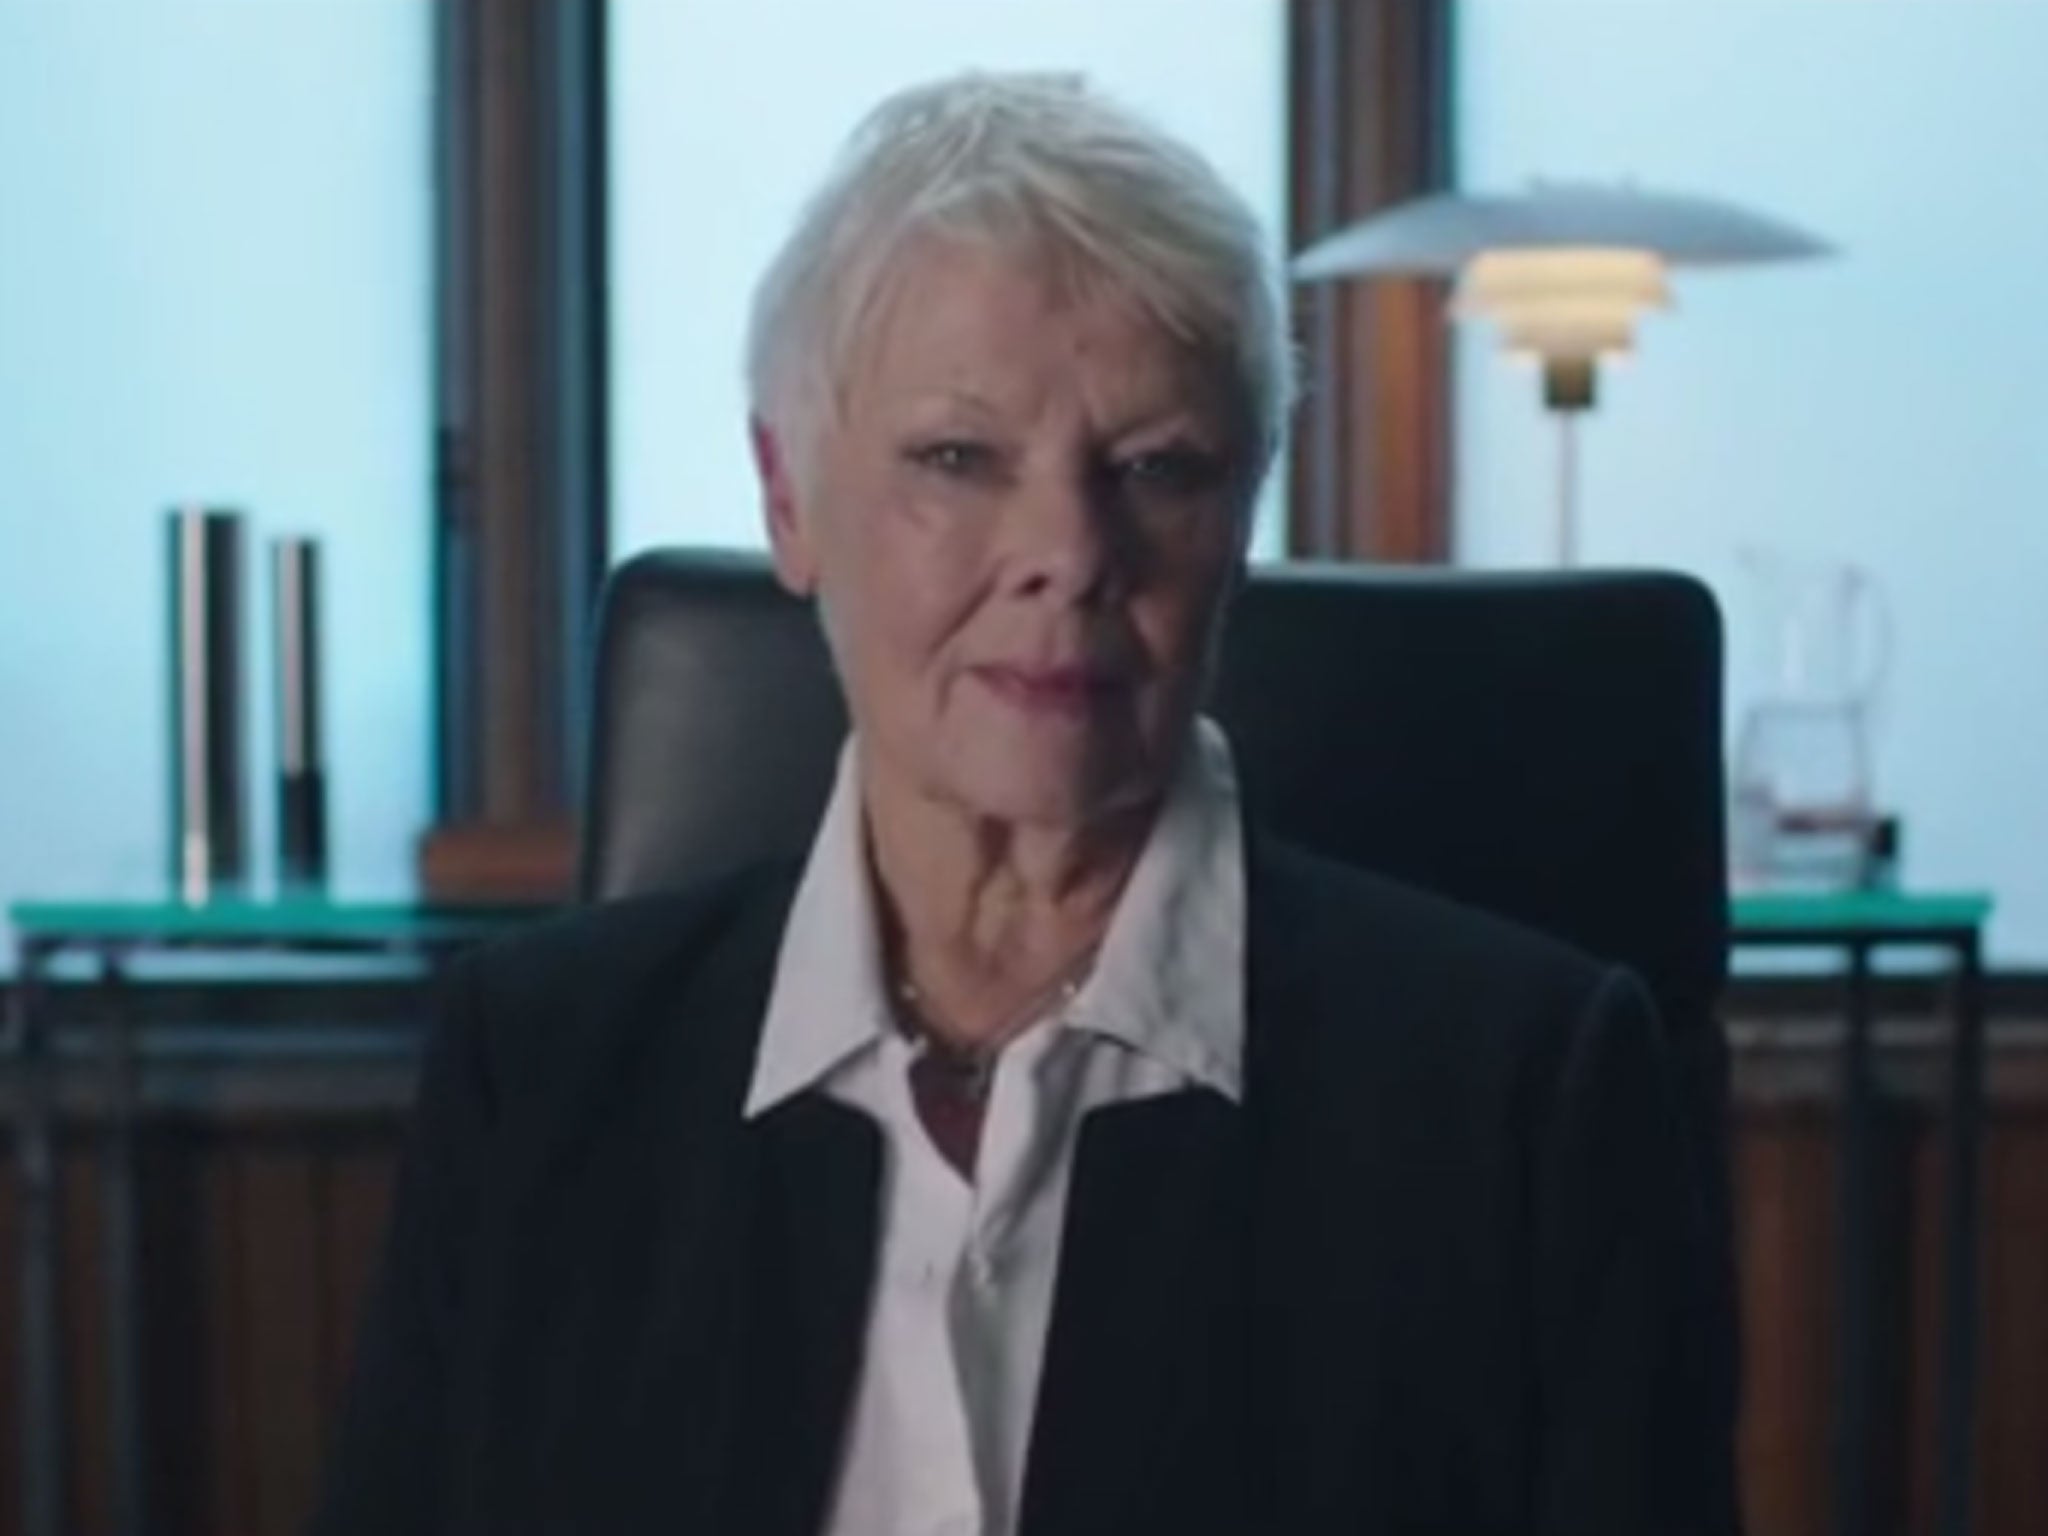 Judi Dench has revived her James Bond character M for an appeal against the decision to give Philomena an R rating